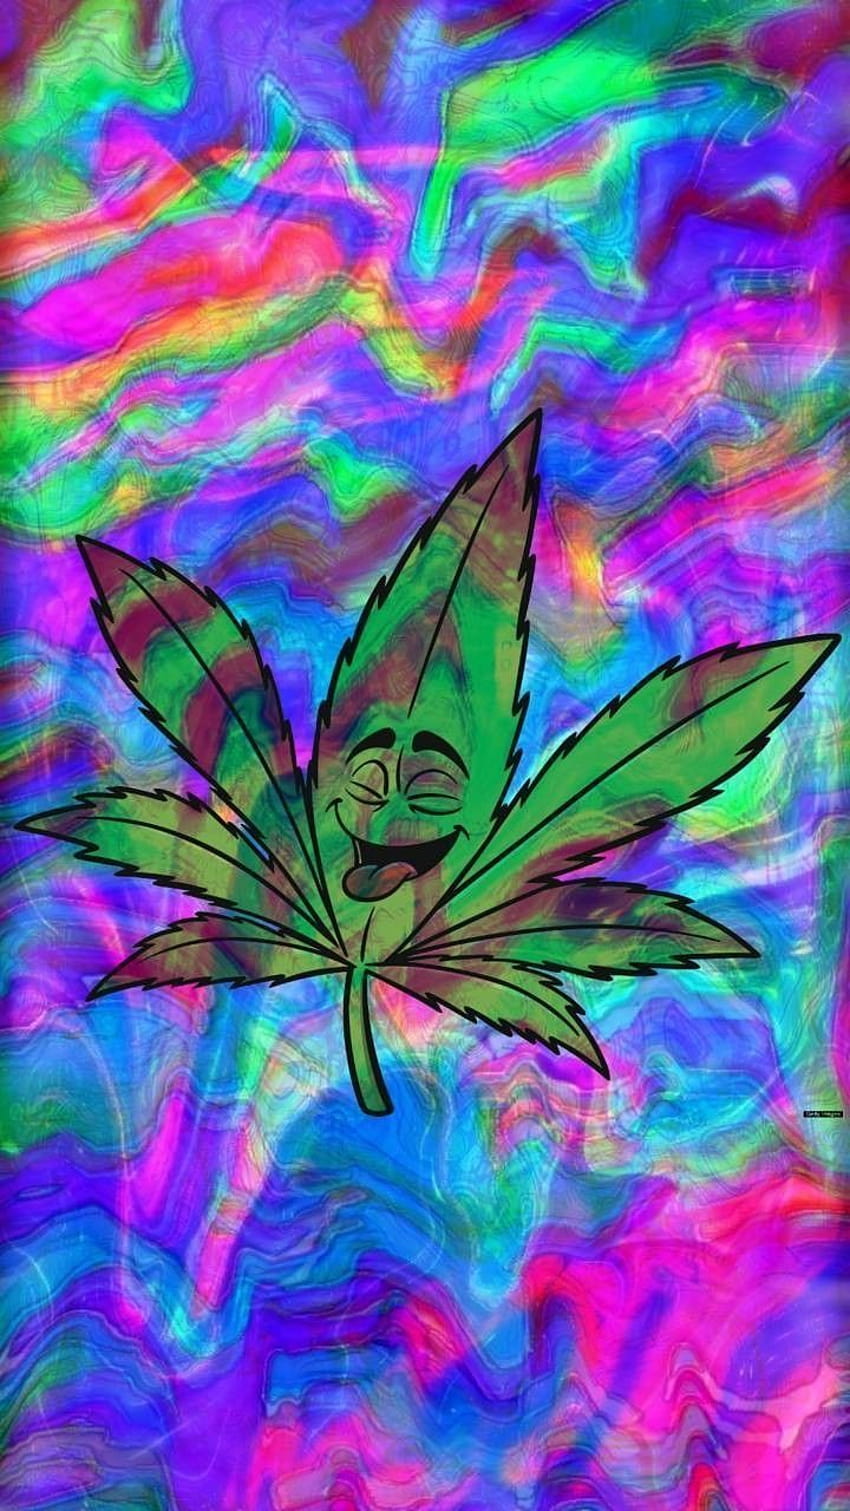 Trippy Weed posted by Ethan Mercado, weed aesthetic HD phone wallpaper